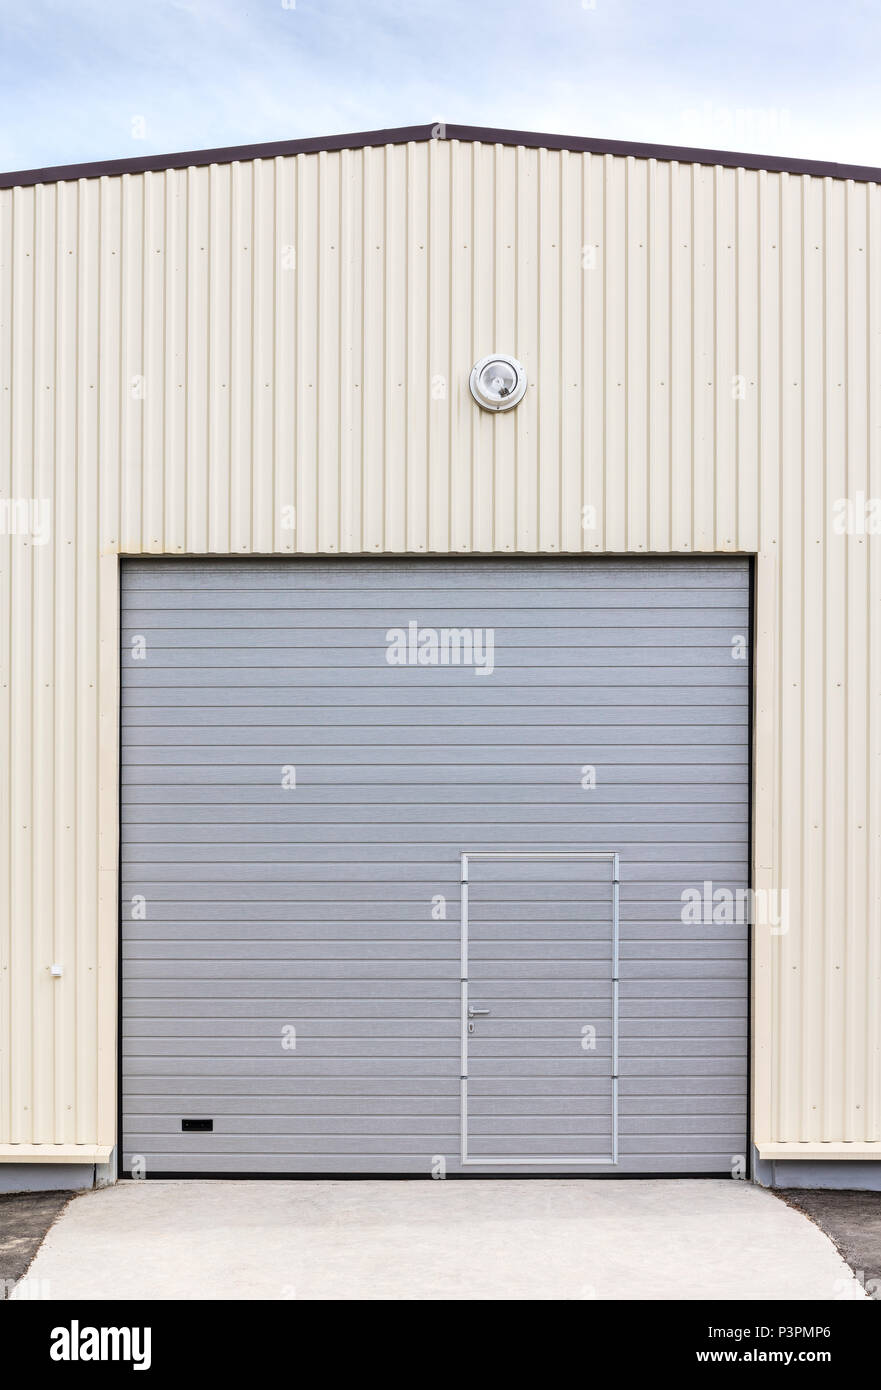 industrial warehouse exterior. closed gray metal gate with door Stock Photo